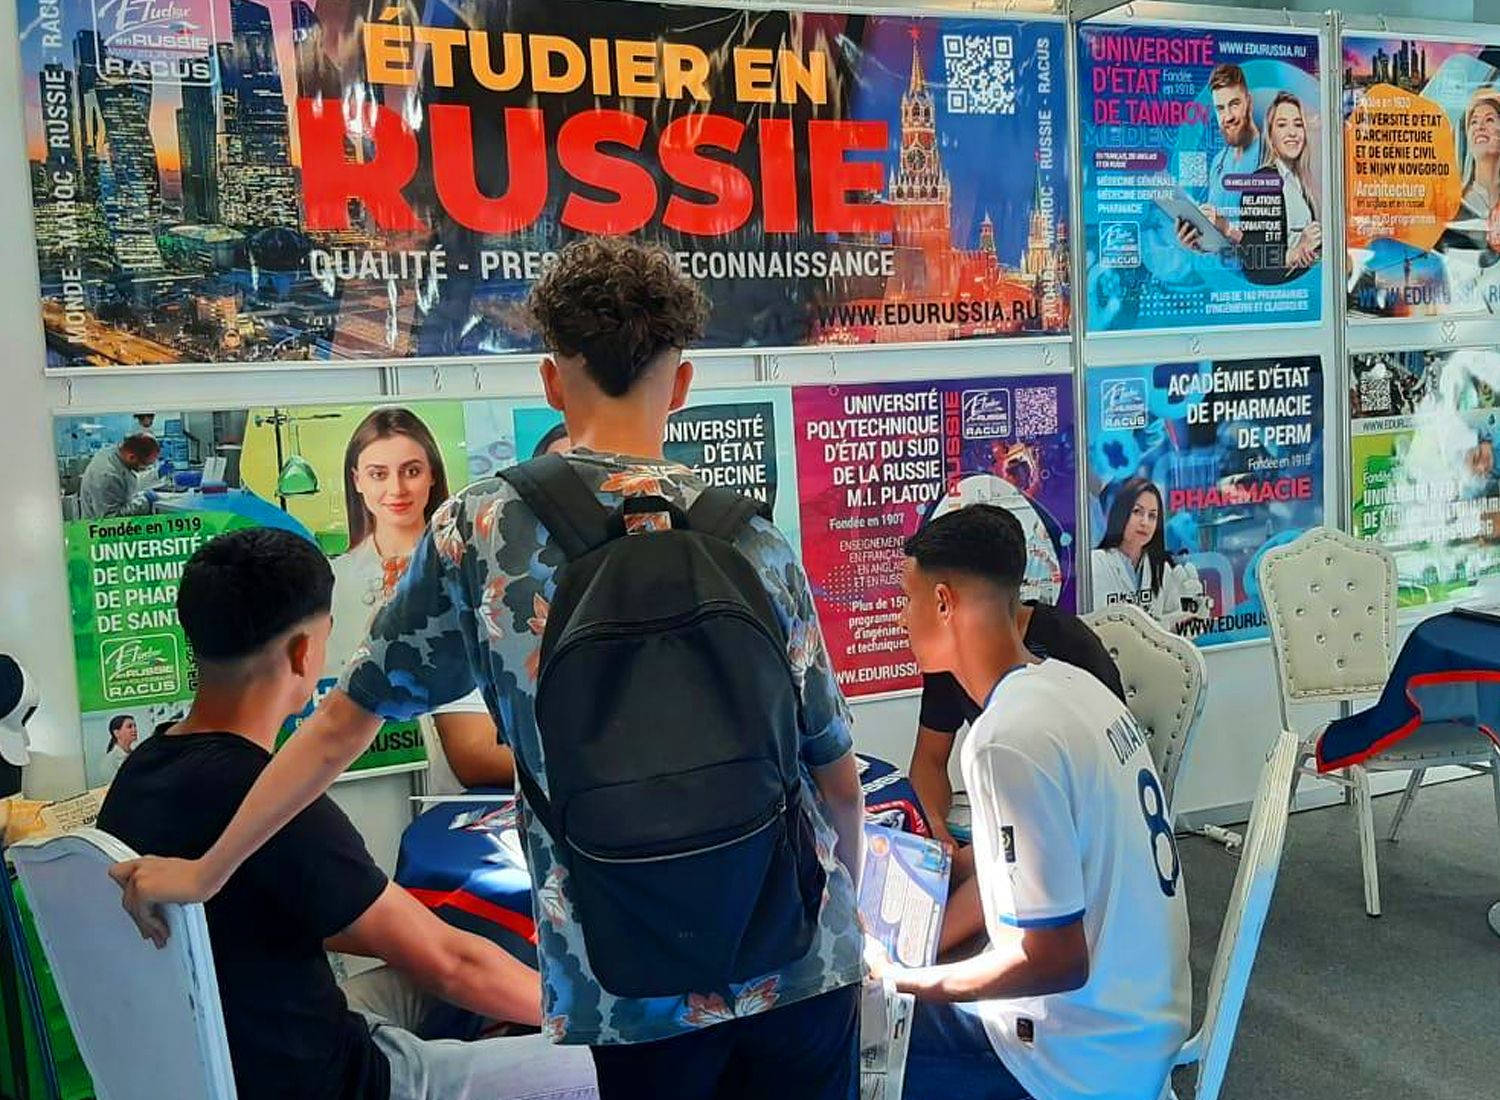 We remind you that admission for the 2023/2024 academic year is OPEN! Apply on our website WWW.EDURUSSIA.RU. Watch our short videos on "RACUS RUSSIA" YouTube channel and see how great it is to study in Russia! See you soon!